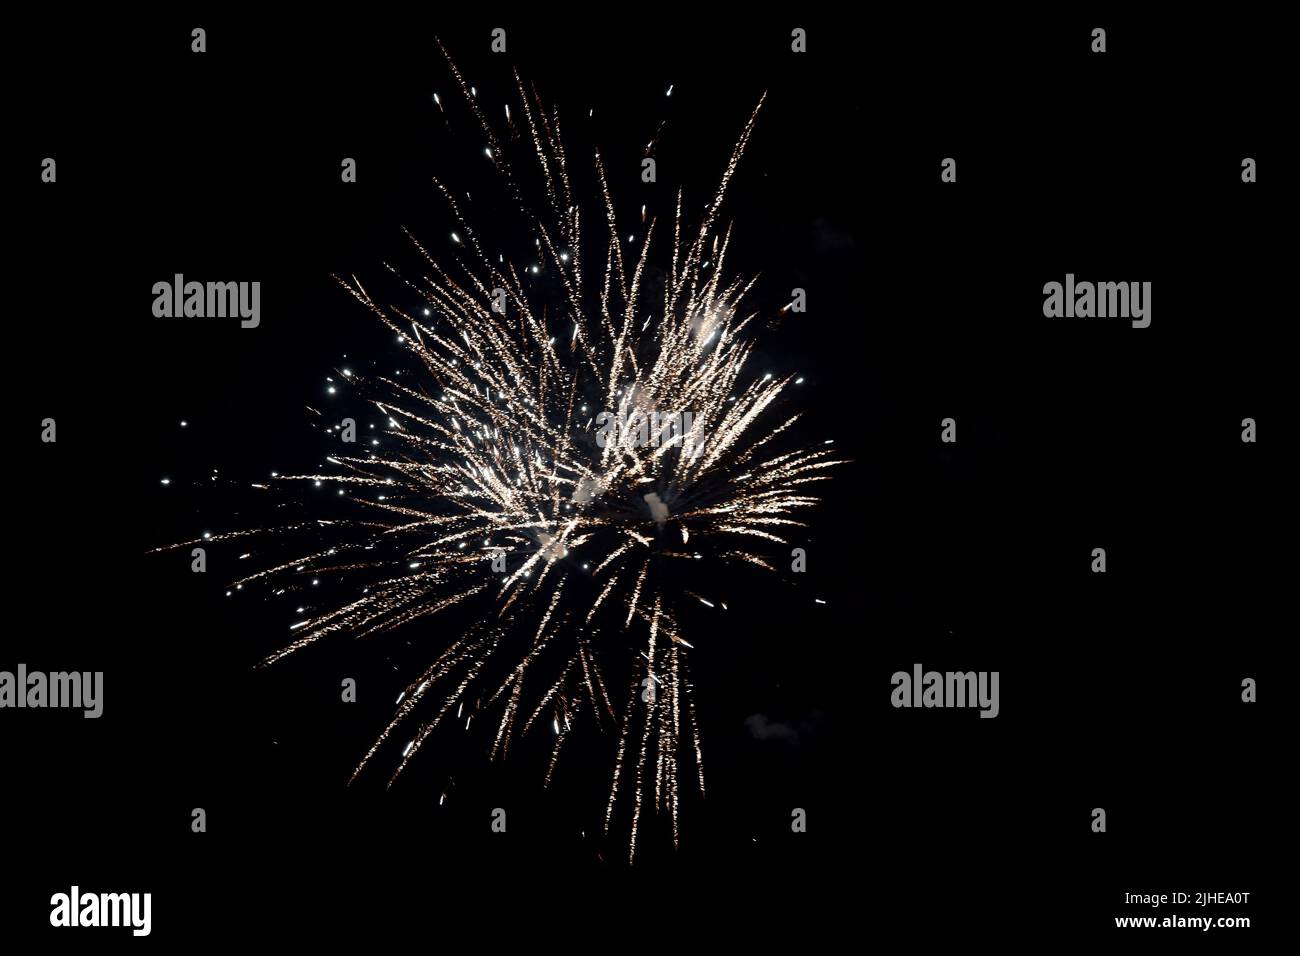 Fireworks at Grinzane castle, Italy. Fireworks seem to be astronomic images Stock Photo